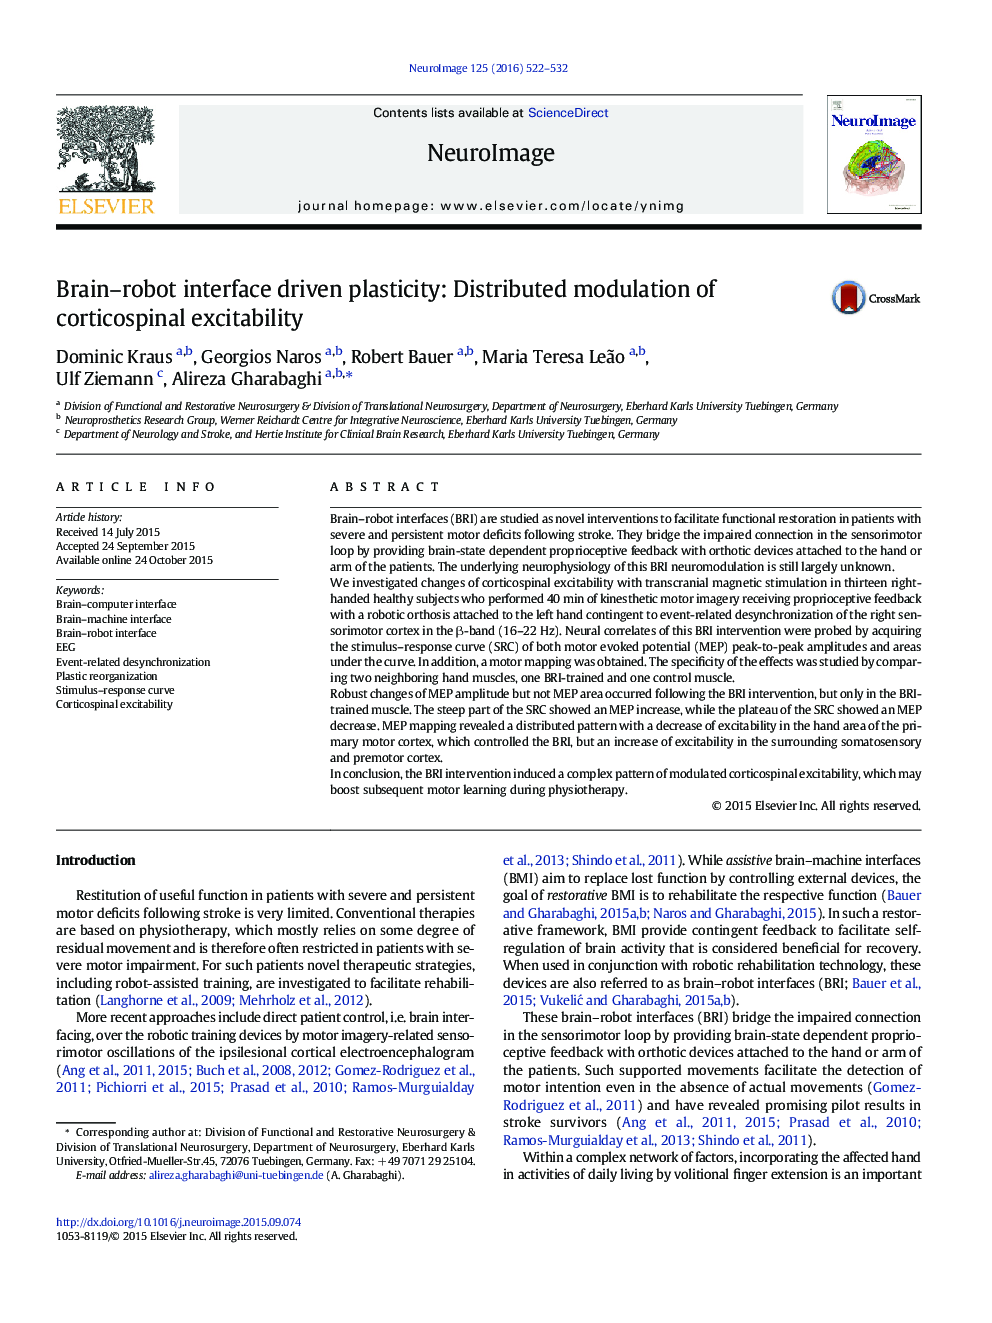 Brain-robot interface driven plasticity: Distributed modulation of corticospinal excitability